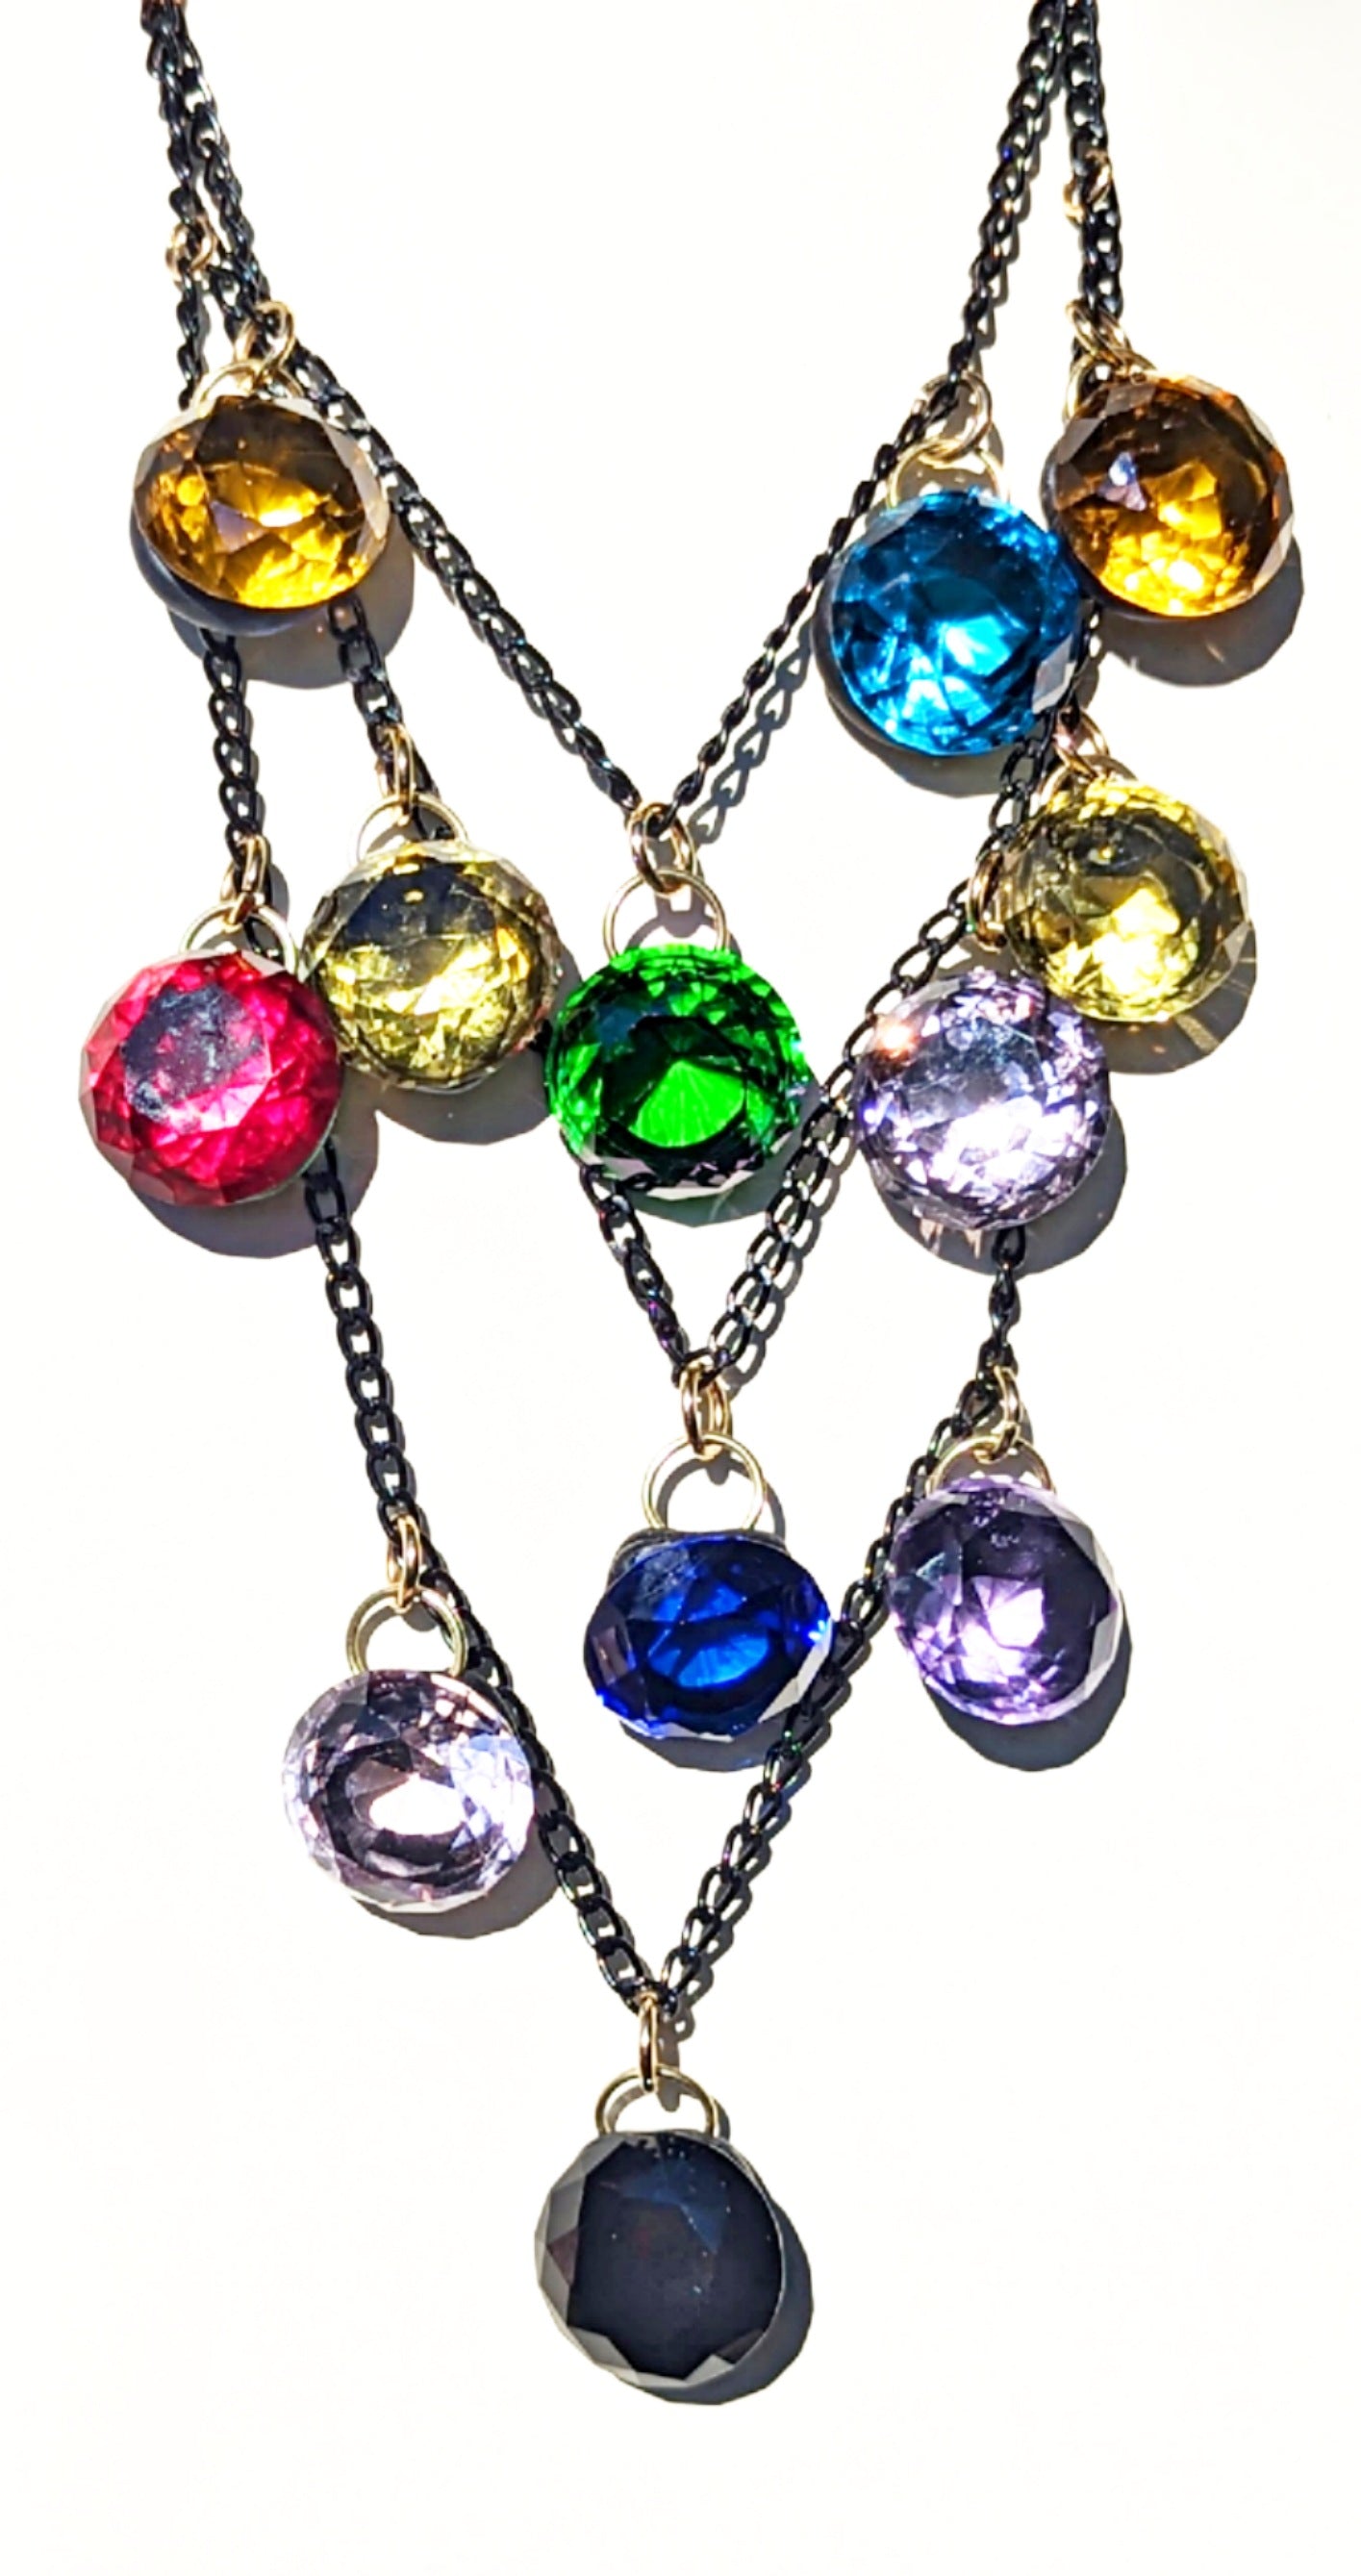 Necklace Multi Layered Colored Crystal Drops on Black Chain Handmade Sugar Gay Isber Stained Glass Inspired